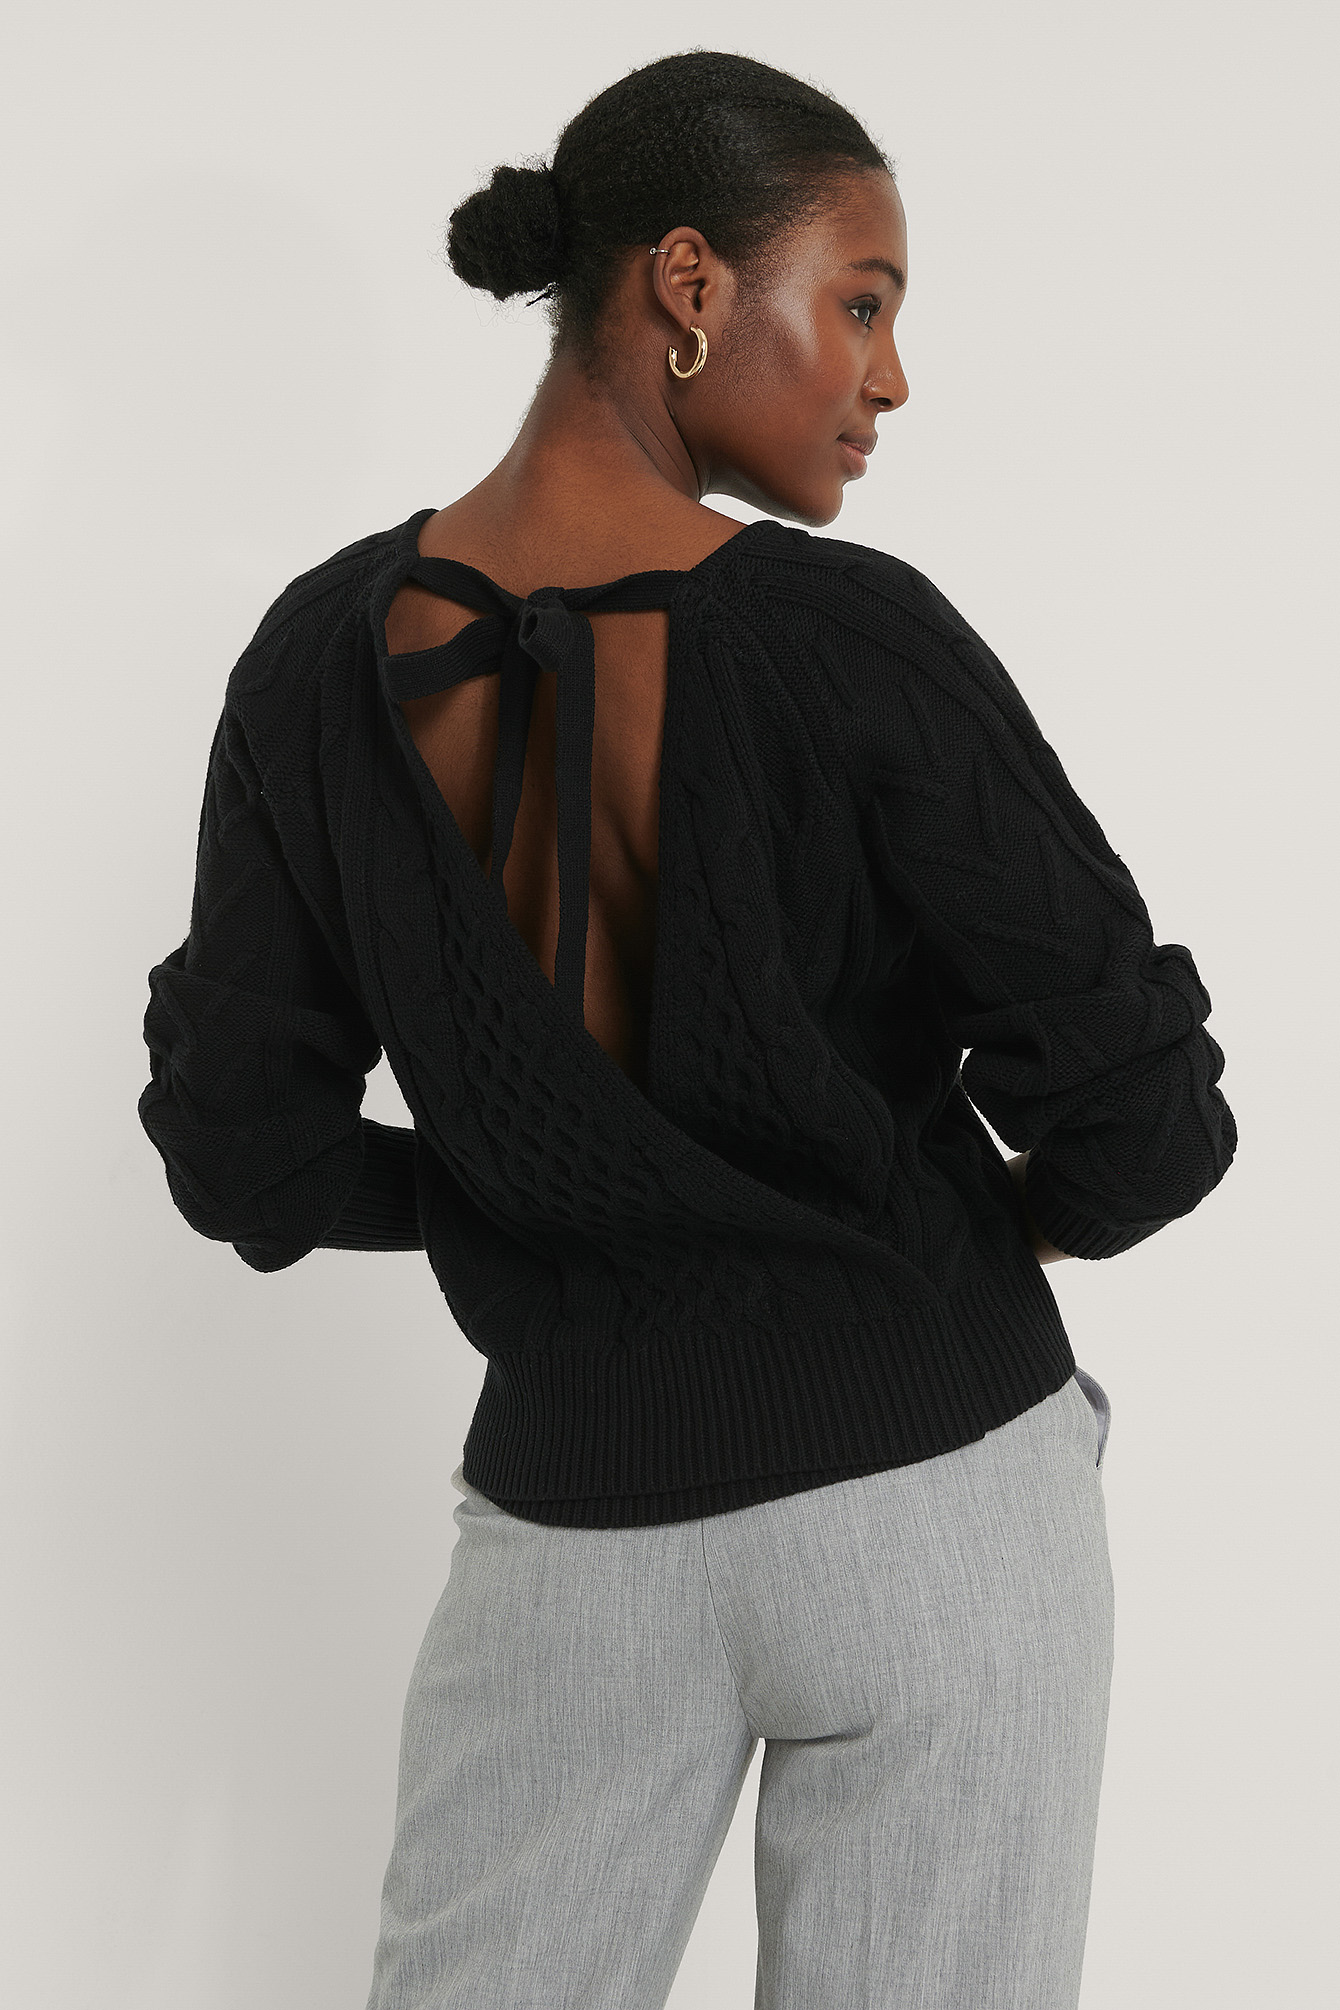 Black Back Overlap Cable Knitted Sweater